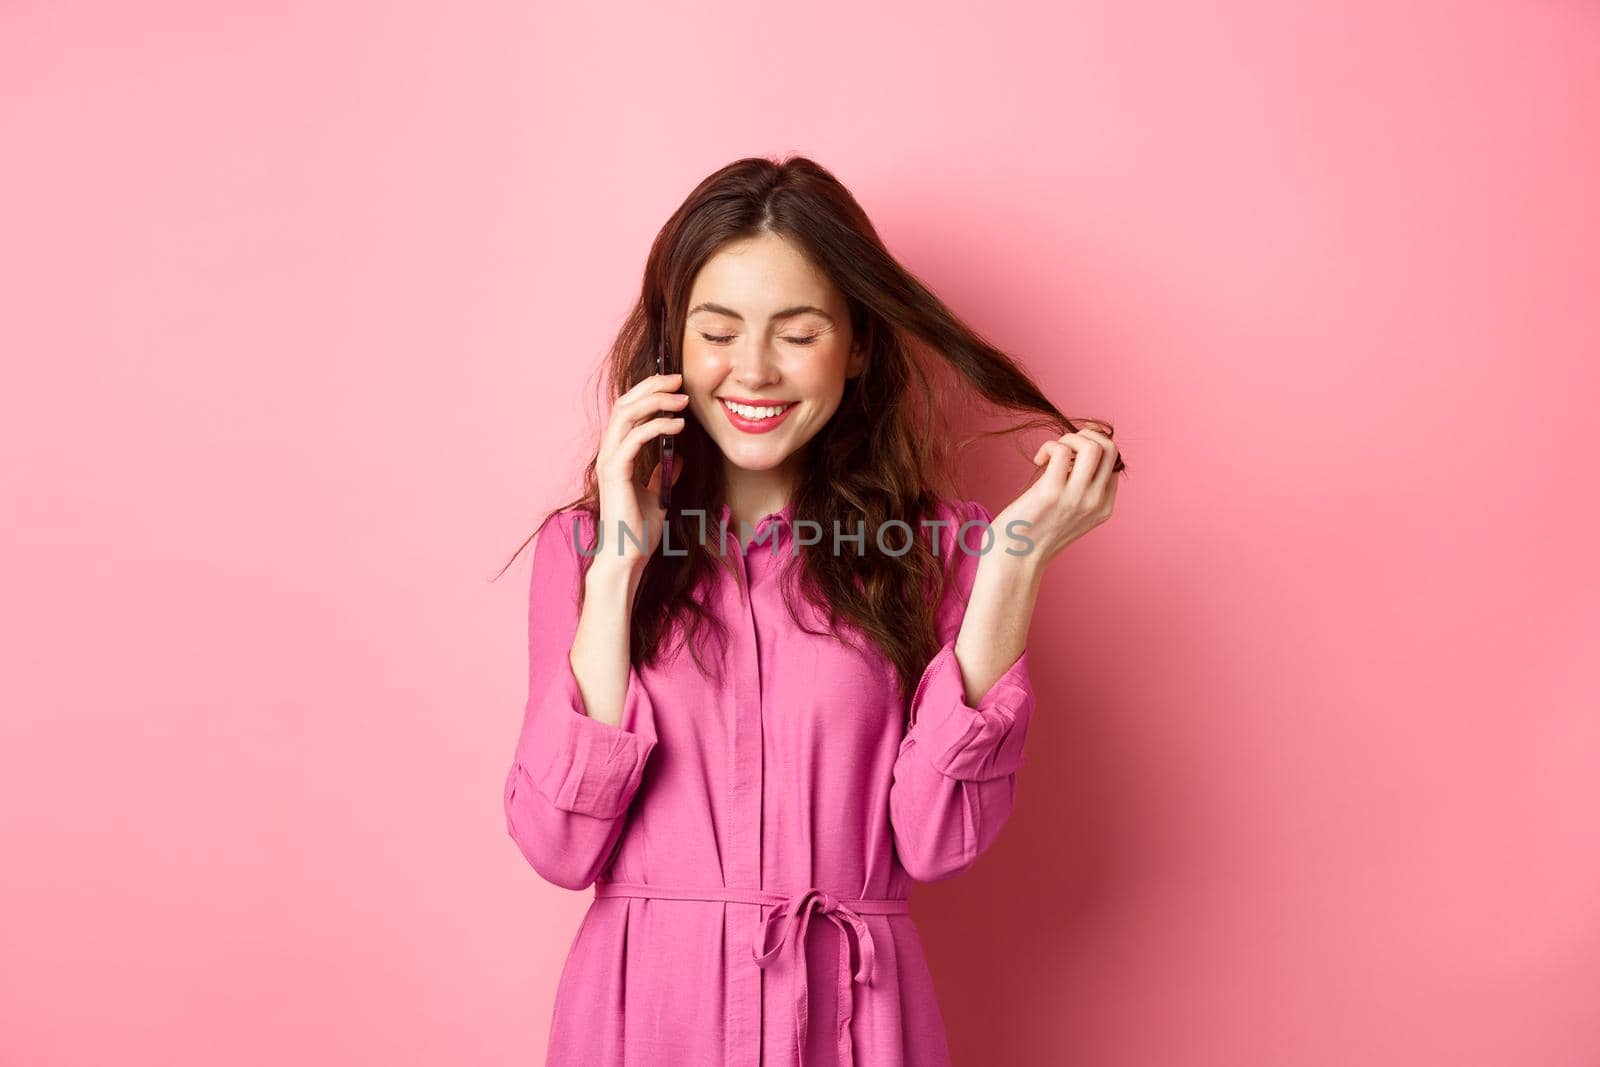 Beautiful young woman calling someone, laughing and smiling during phone call, talking to friend and playing with hair strands, standing against pink background.